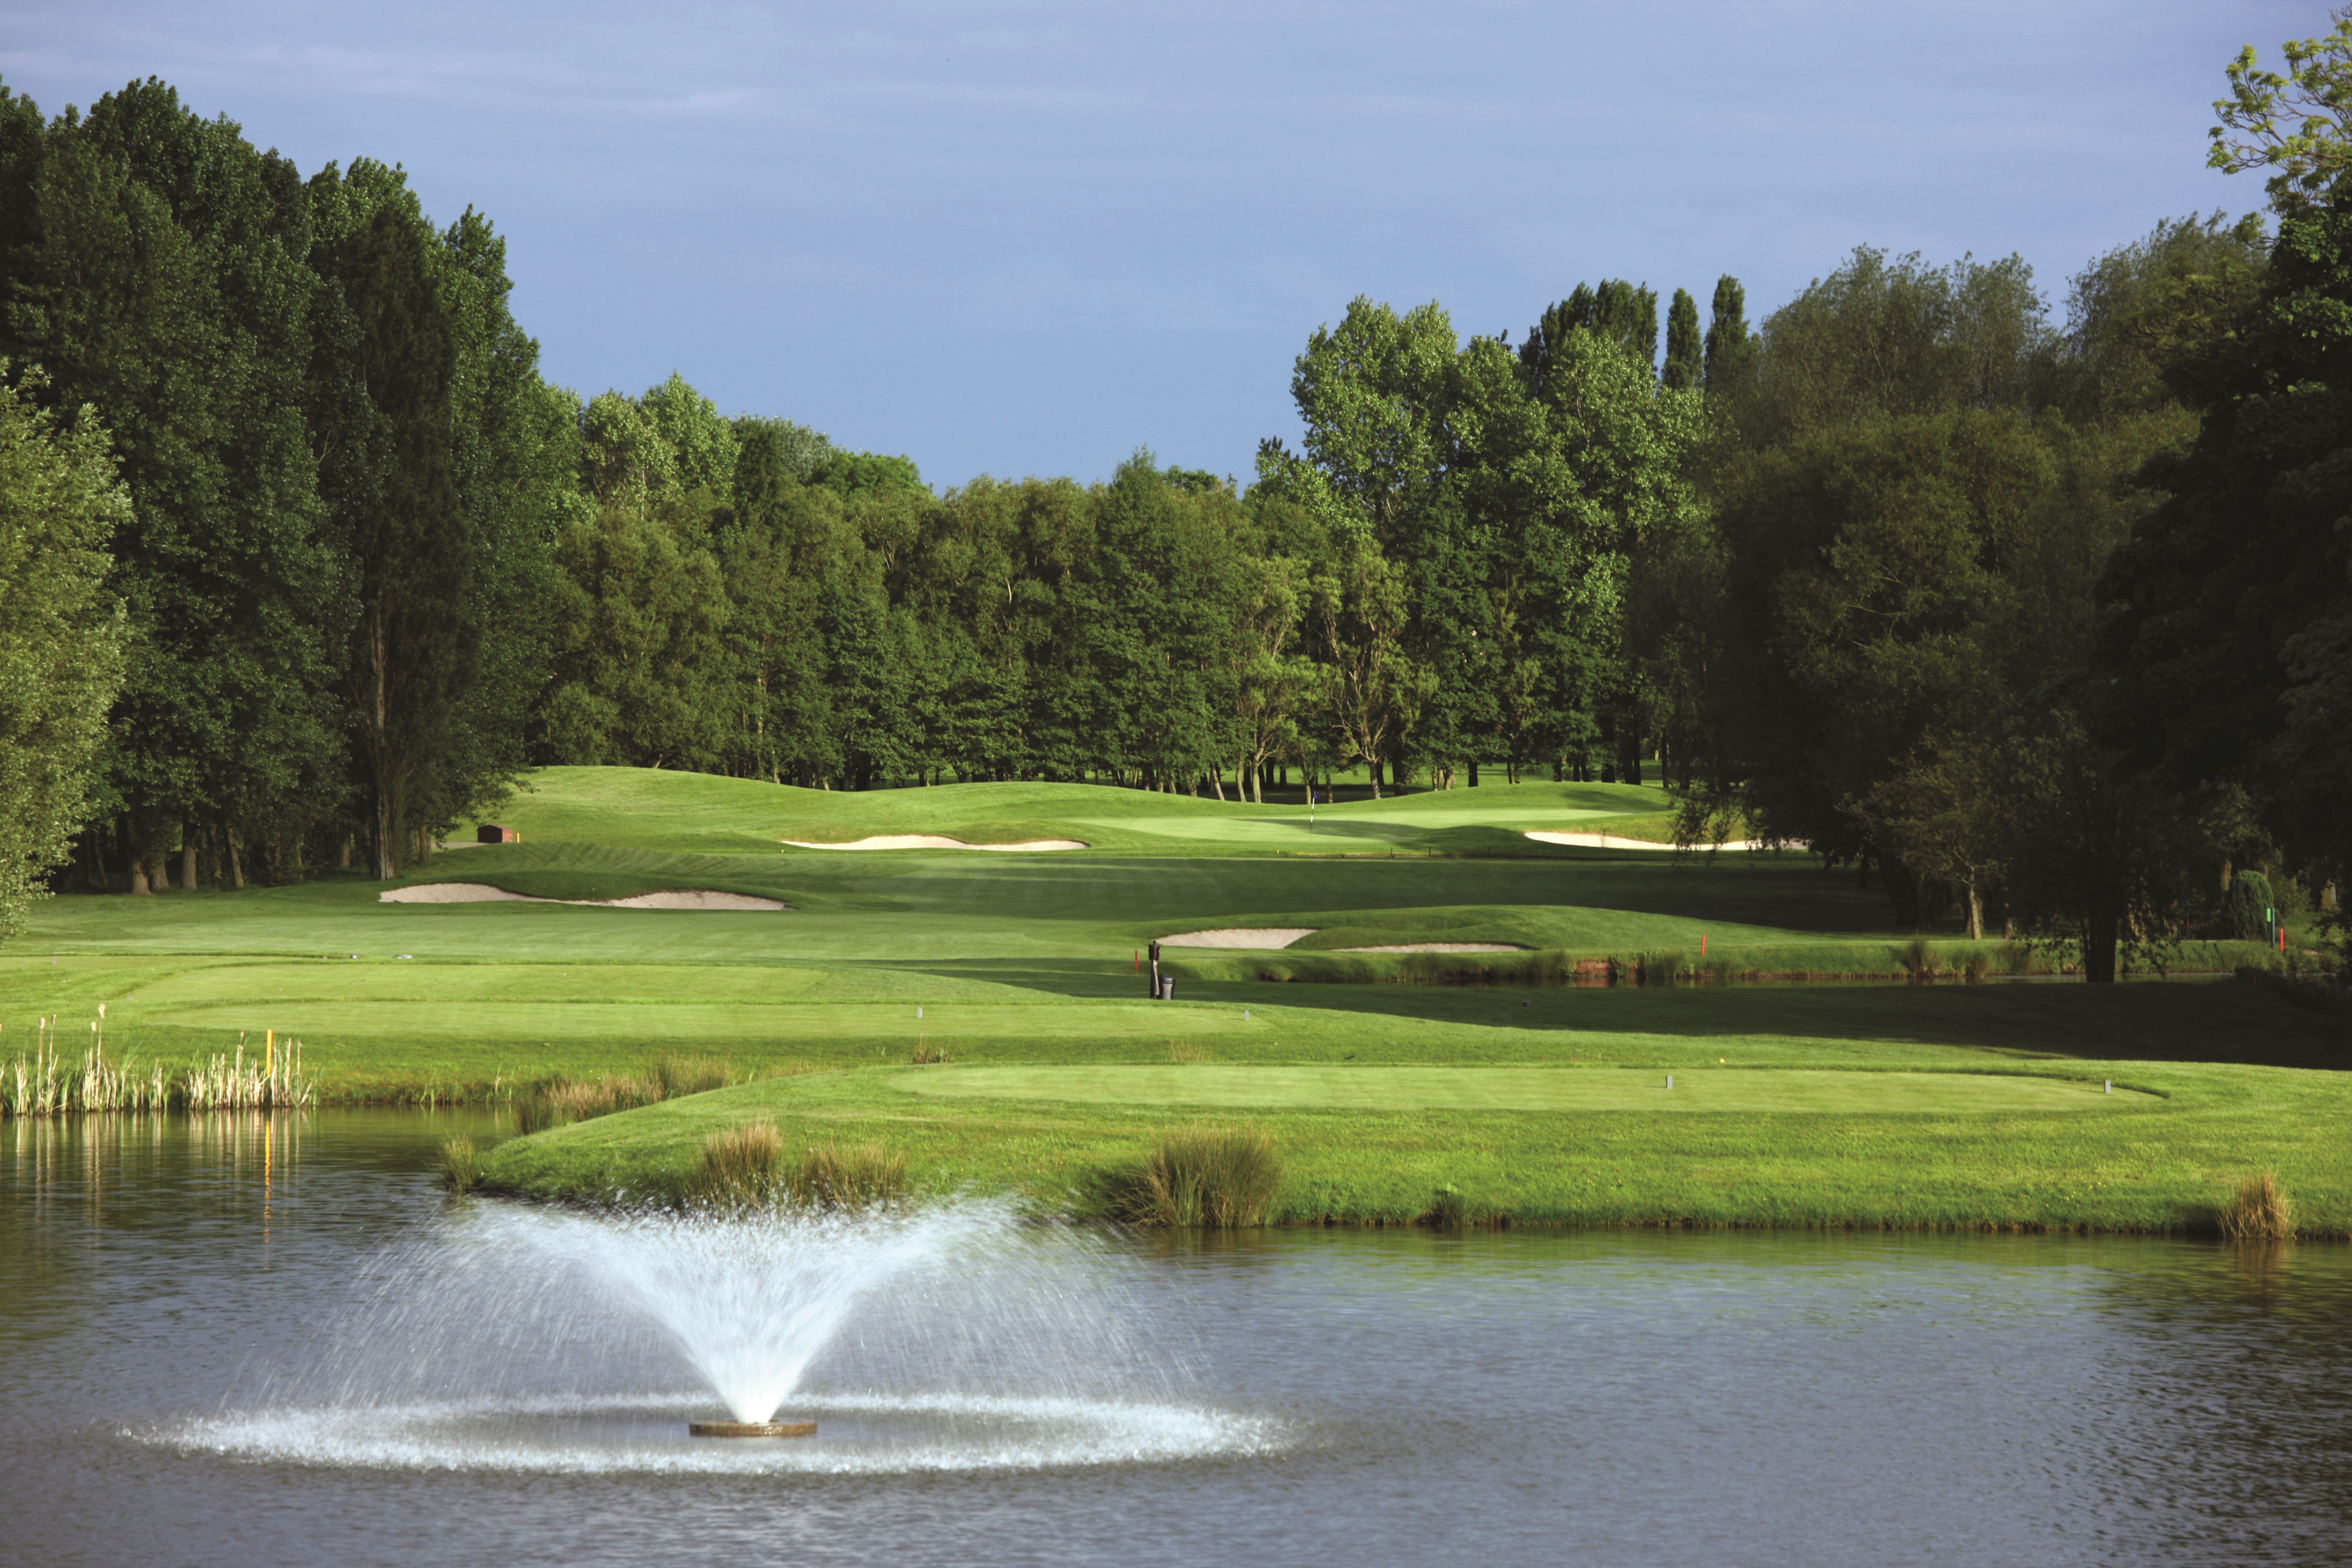 Brabazon Golf Course at the Belfry